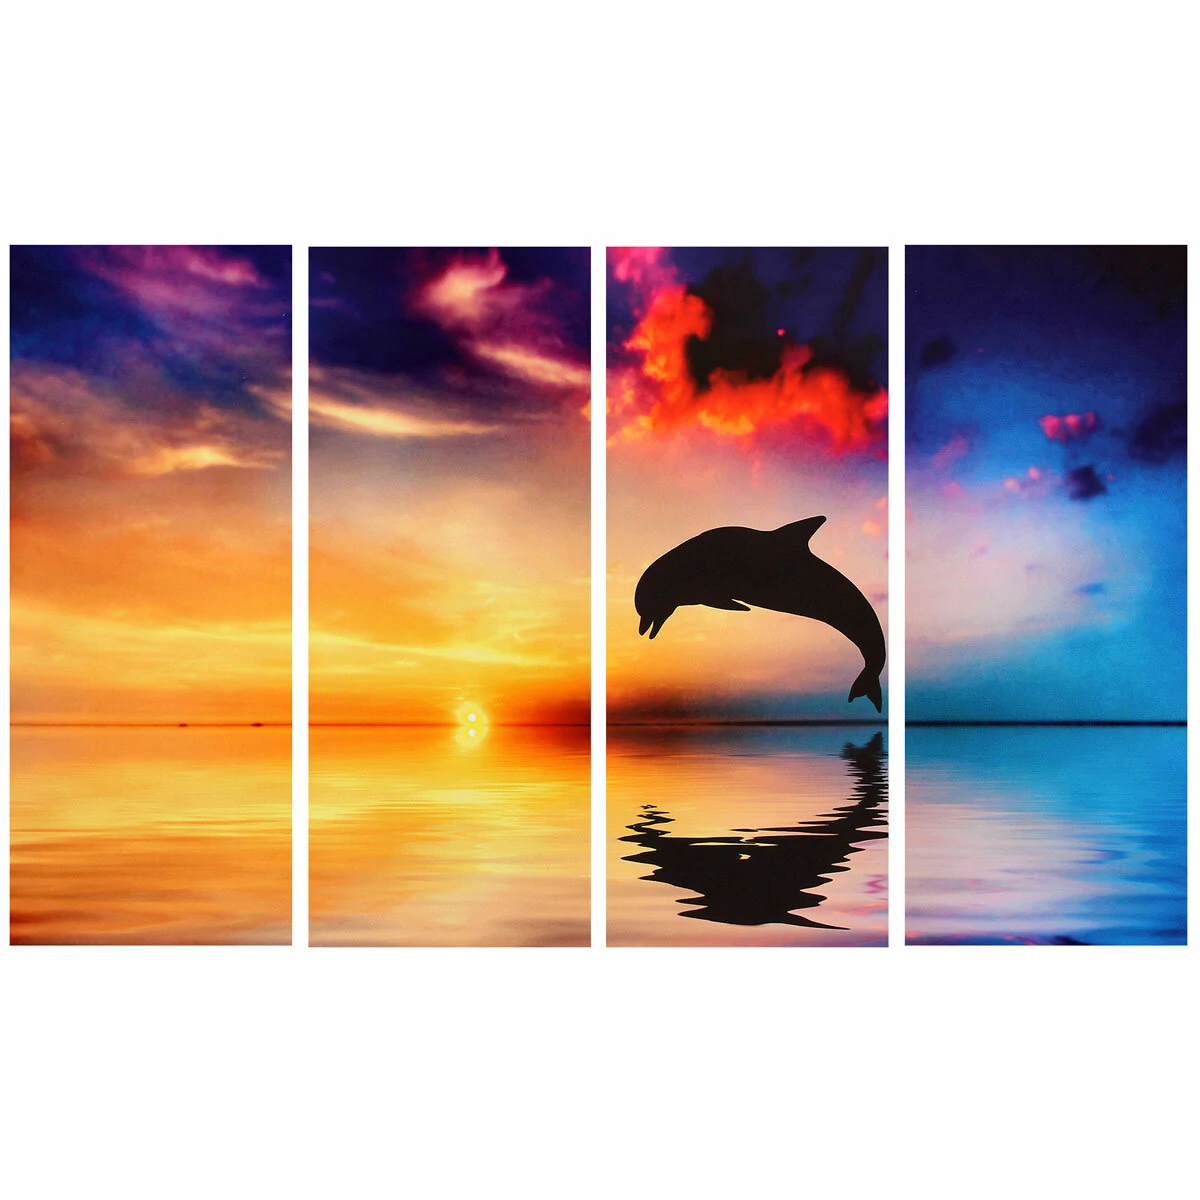 4pcs/set dolphin sunset sea wall decorative paintings canvas print art pictures frameless wall hanging decorations for home office